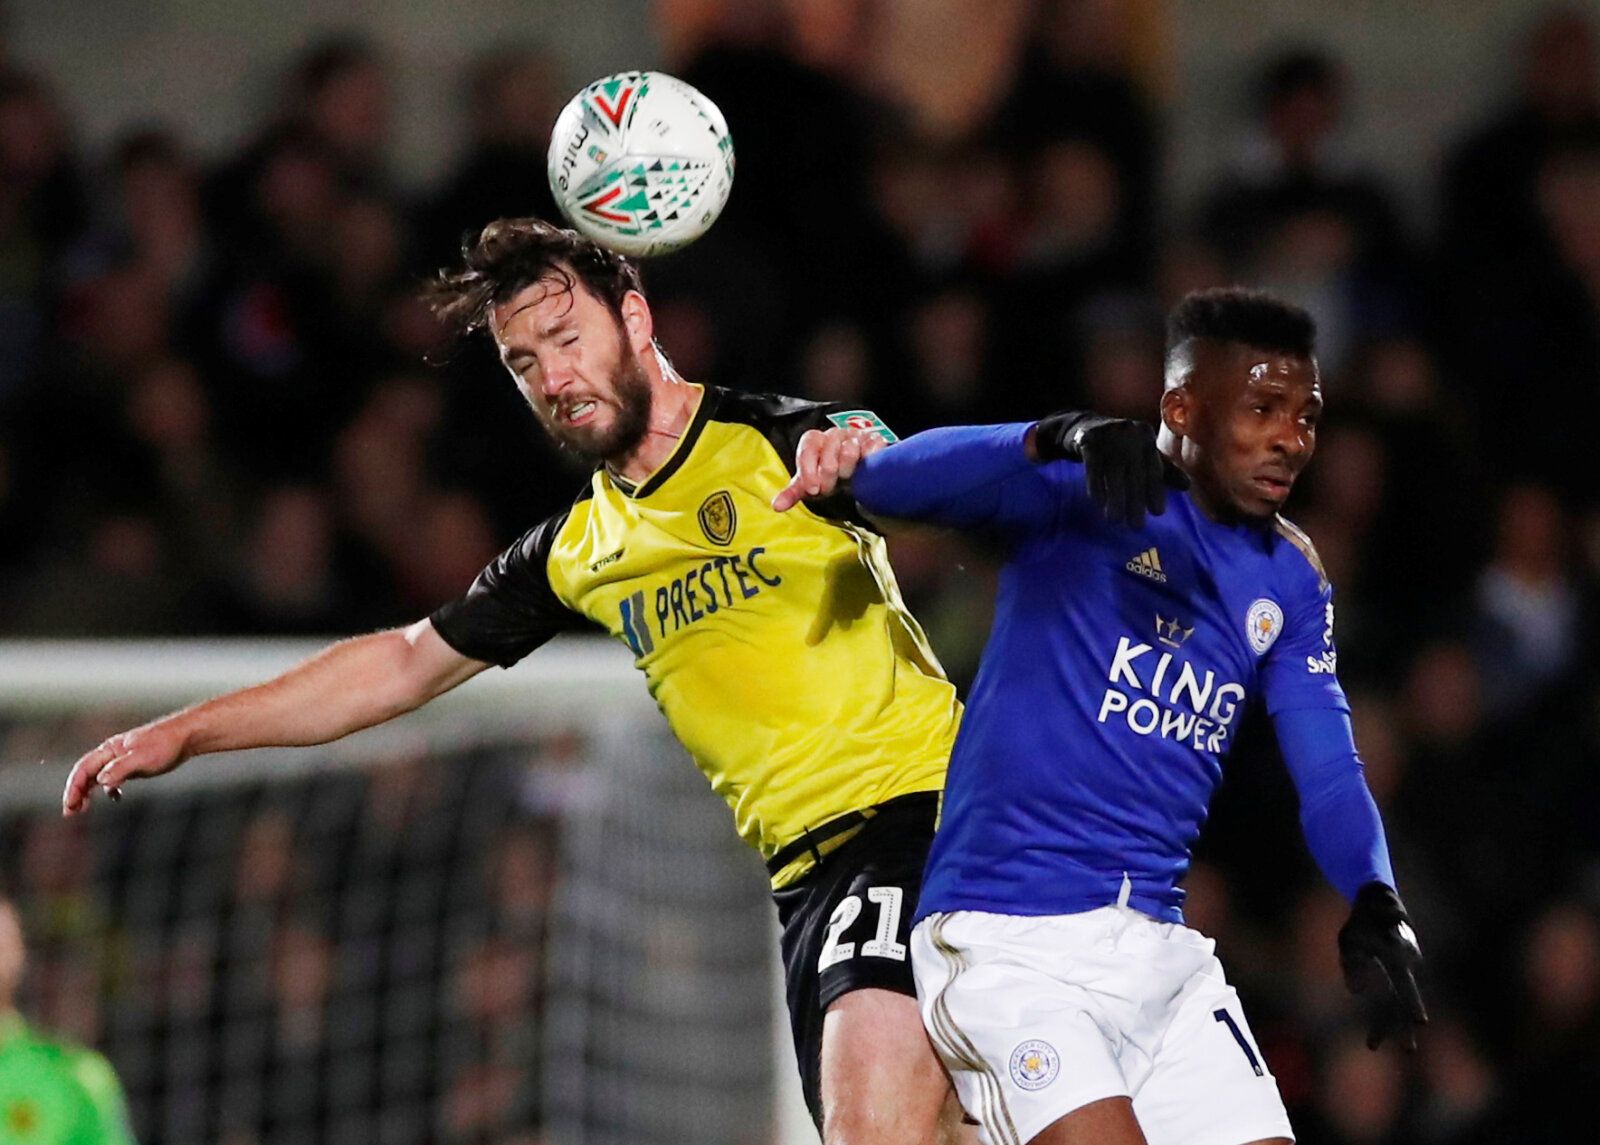 Soccer Football - Carabao Cup - Fourth Round - Burton Albion v Leicester City - Pirelli Stadium, Burton-on-Trent, Britain - October 29, 2019  Burton Albion's John-Joe O'Toole in action with Leicester City's Kelechi Iheanacho    Action Images via Reuters/Andrew Boyers  EDITORIAL USE ONLY. No use with unauthorized audio, video, data, fixture lists, club/league logos or 